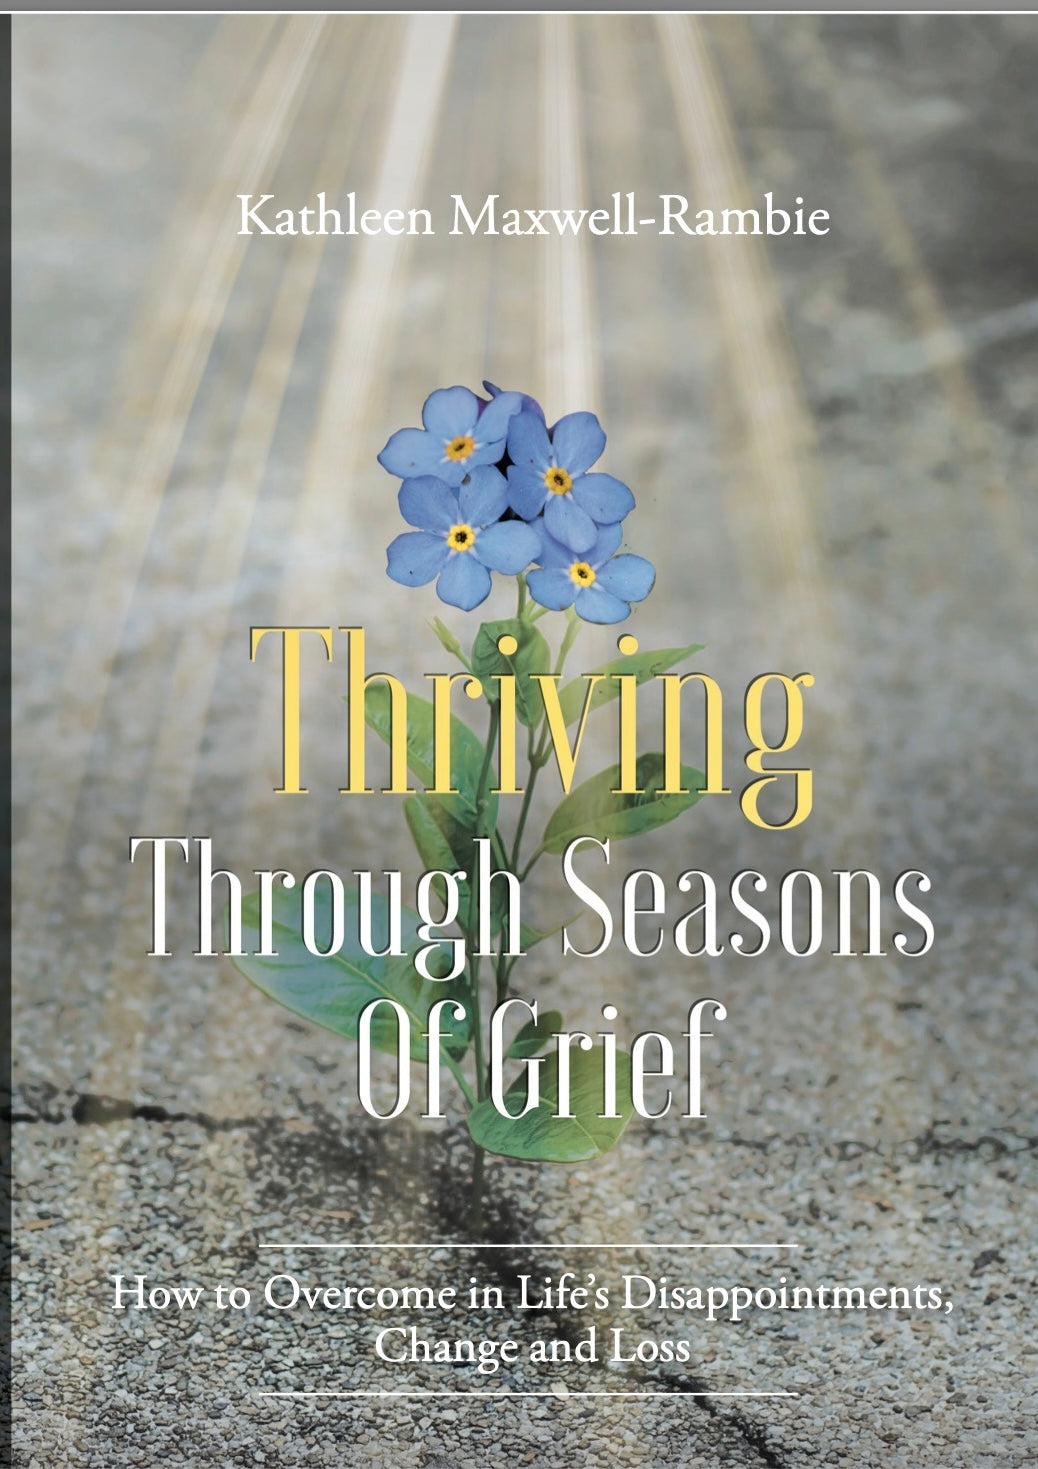 Thriving Through Seasons of Grief